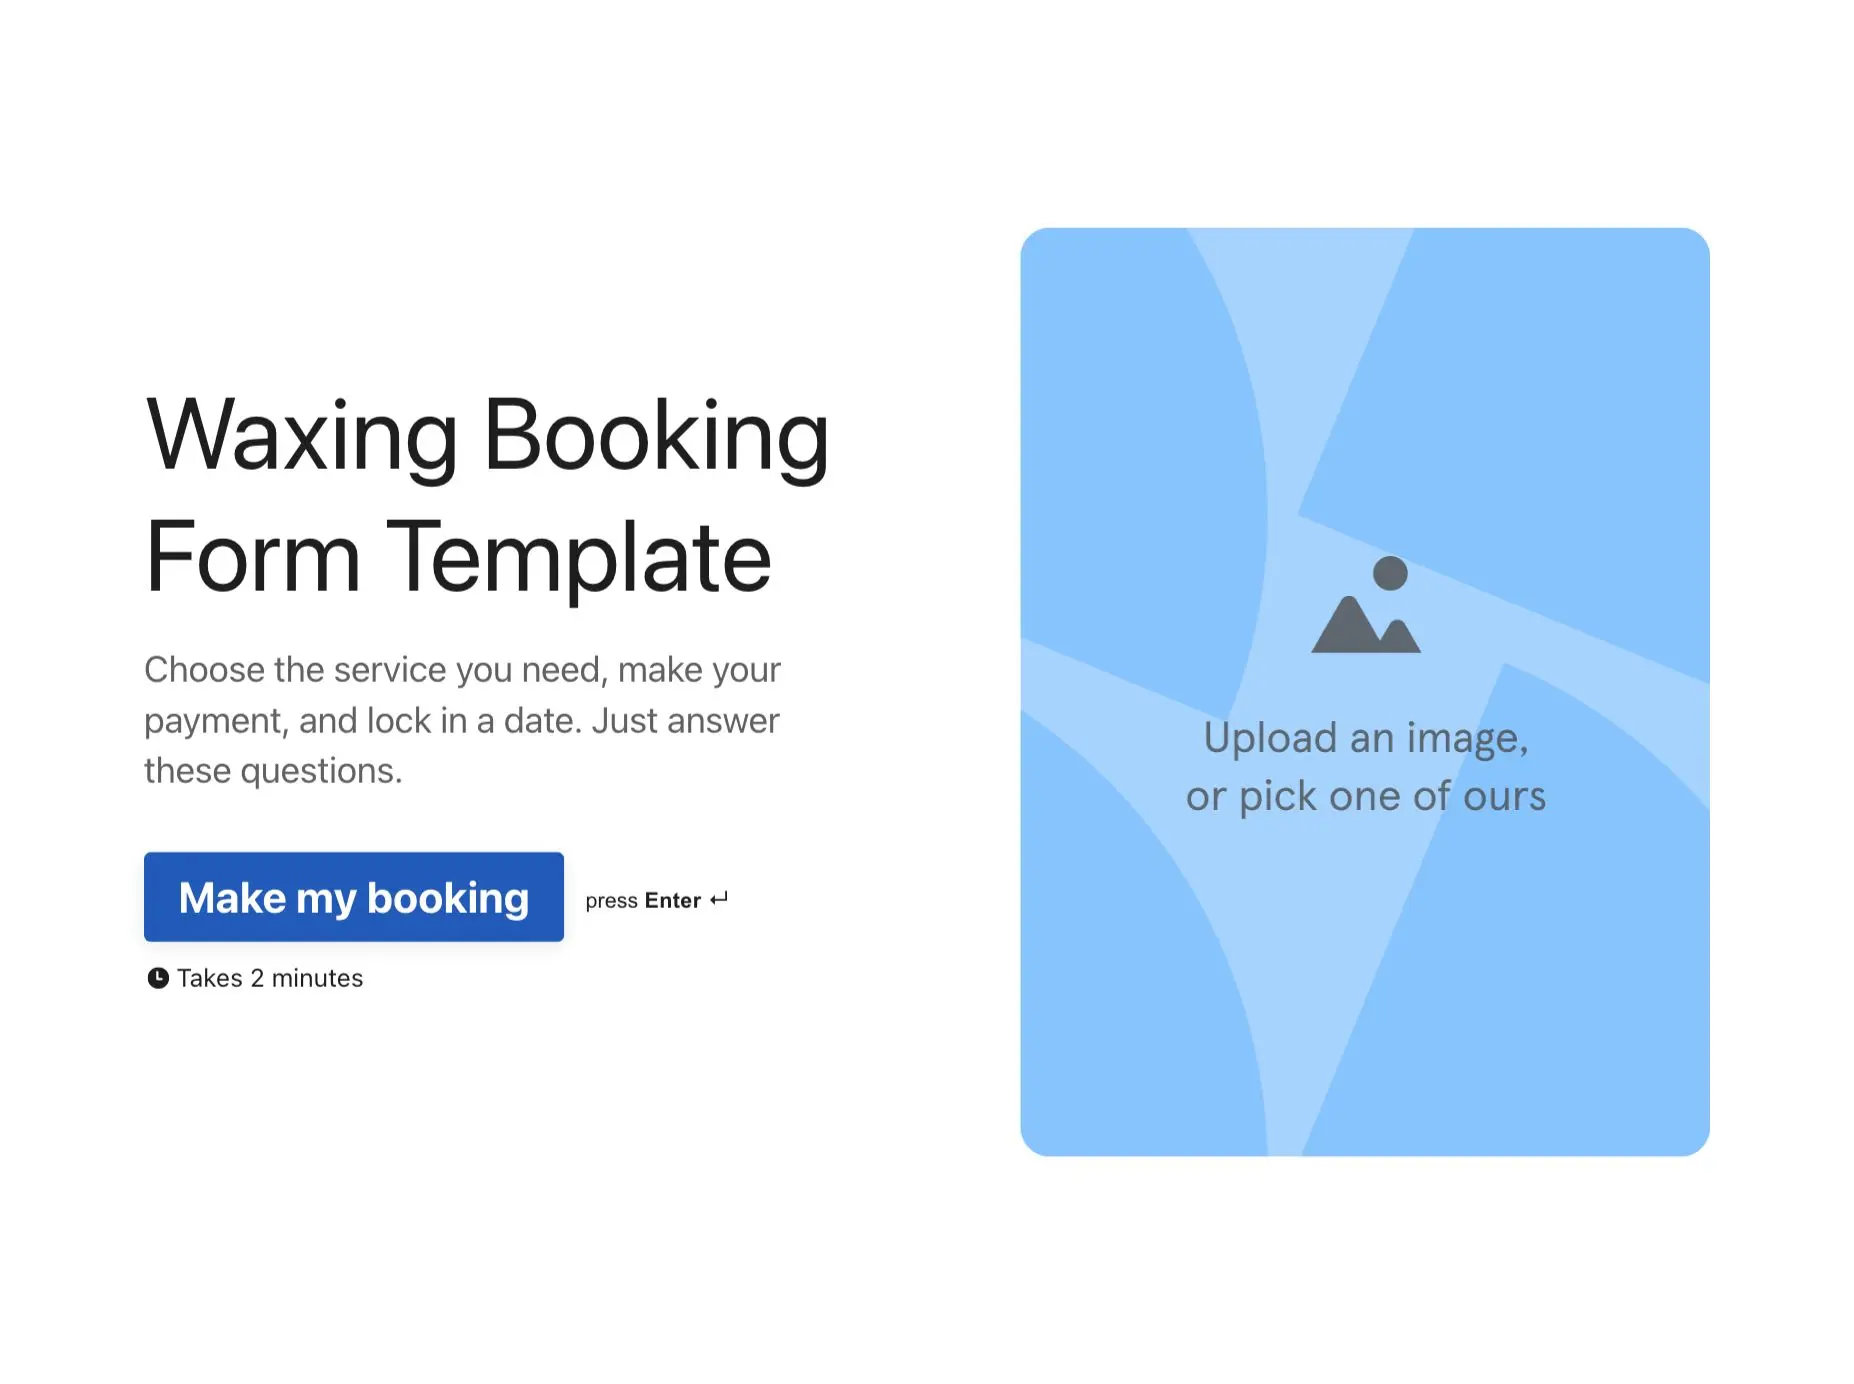 Waxing Booking Form Template Hero